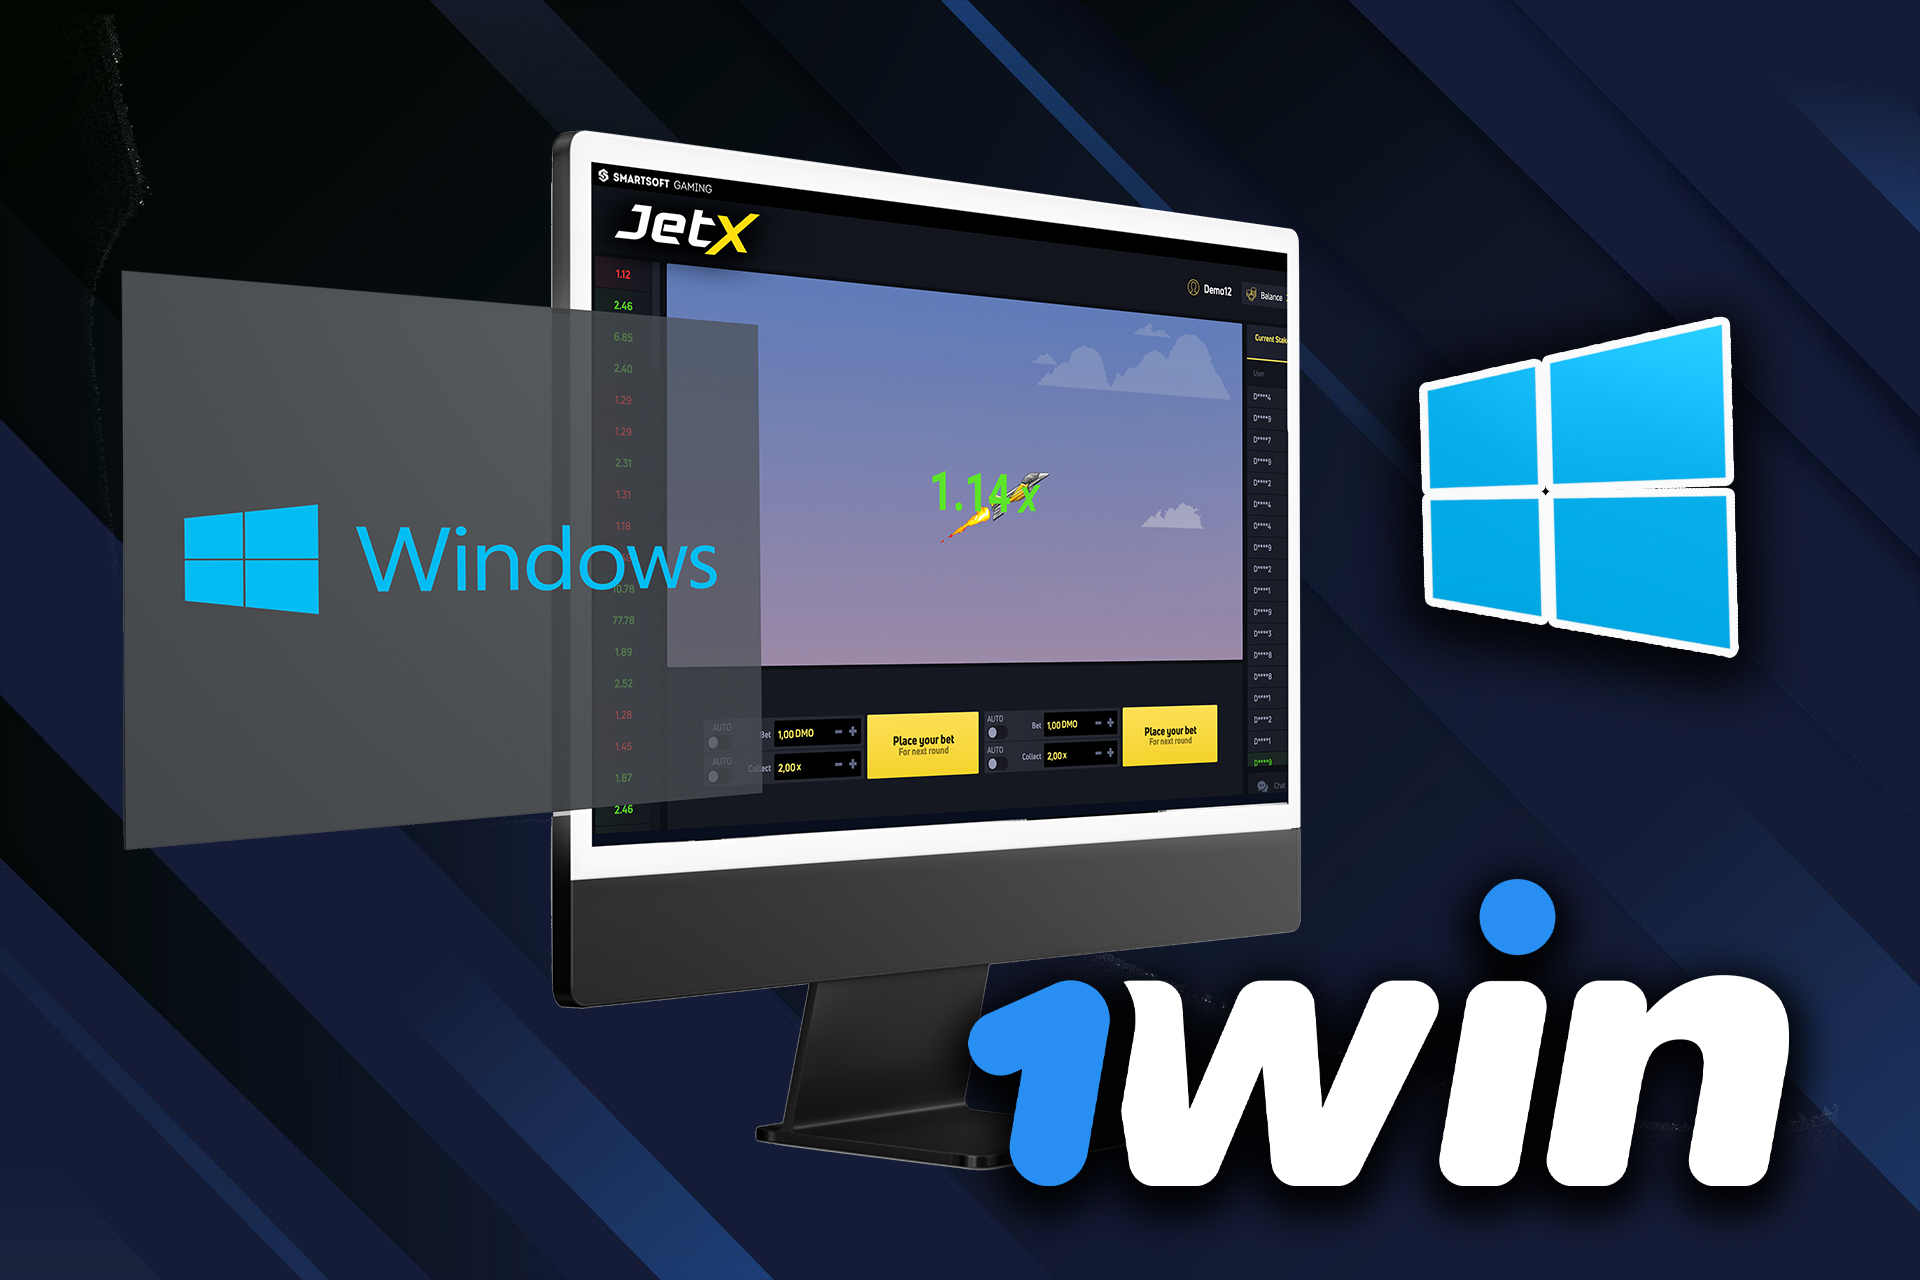 Download the desktop version of 1win to play Jet X on your computer.